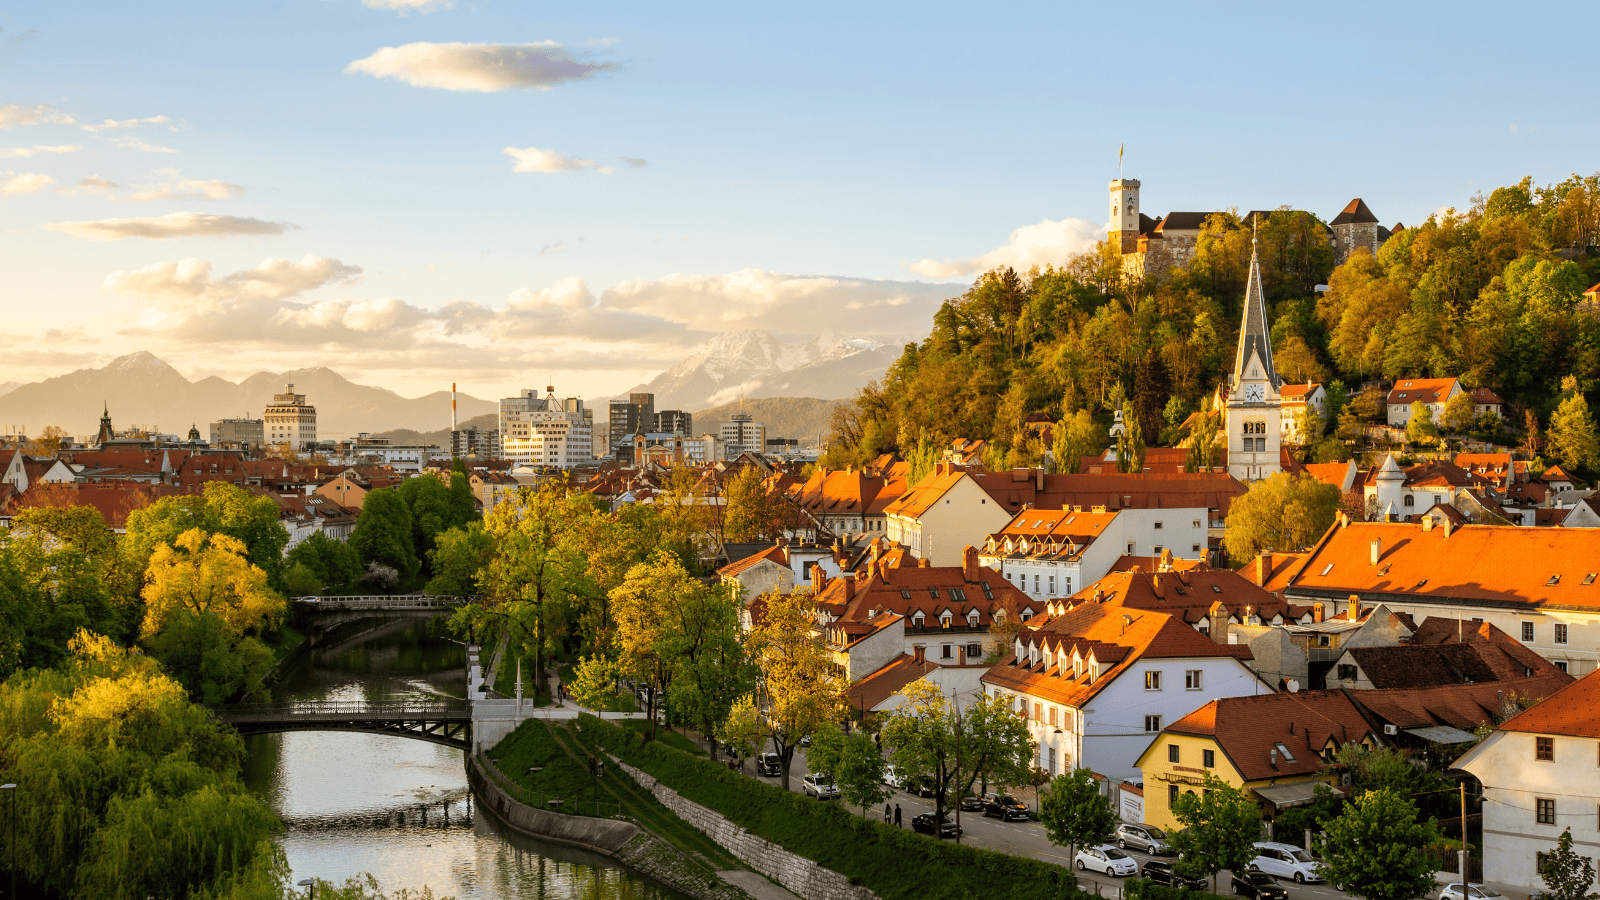 <p>Slovenia’s capital, Ljubljana, is an underrated option for limited-mobility tourists. The city poses minimal barriers to those with disabilities, giving everyone an equally rewarding experience.</p><p>Ljubljana’s historic streets will transport you back in time with their old-world charm. Riverside paths are also broadly accessible, offering exceptional city views.</p>